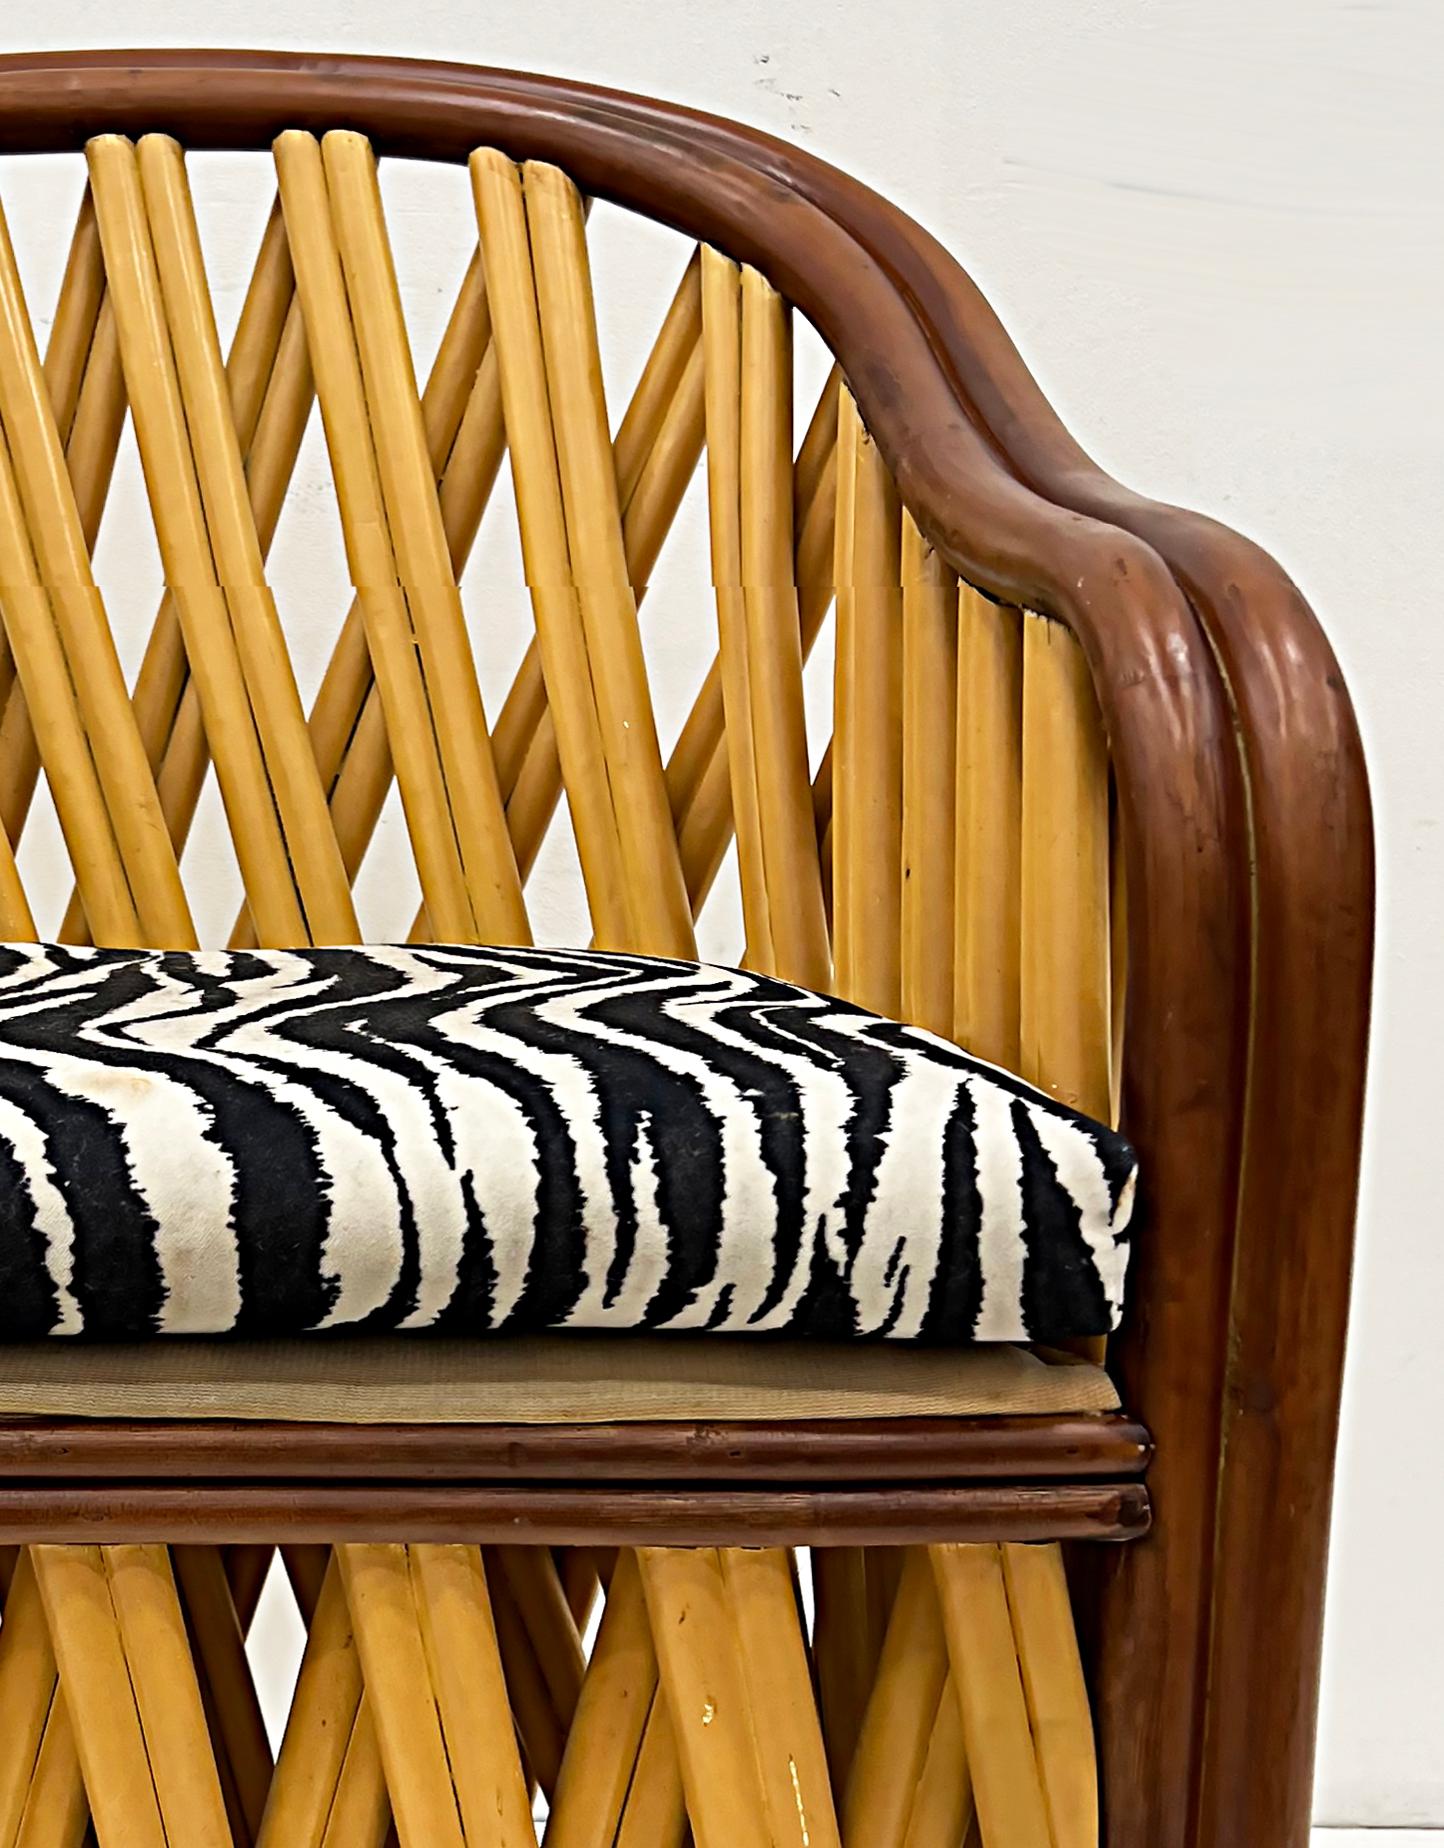 Fabric Vintage Coastal Tropical Wooden Accent Chair with Zebra Print Cushion